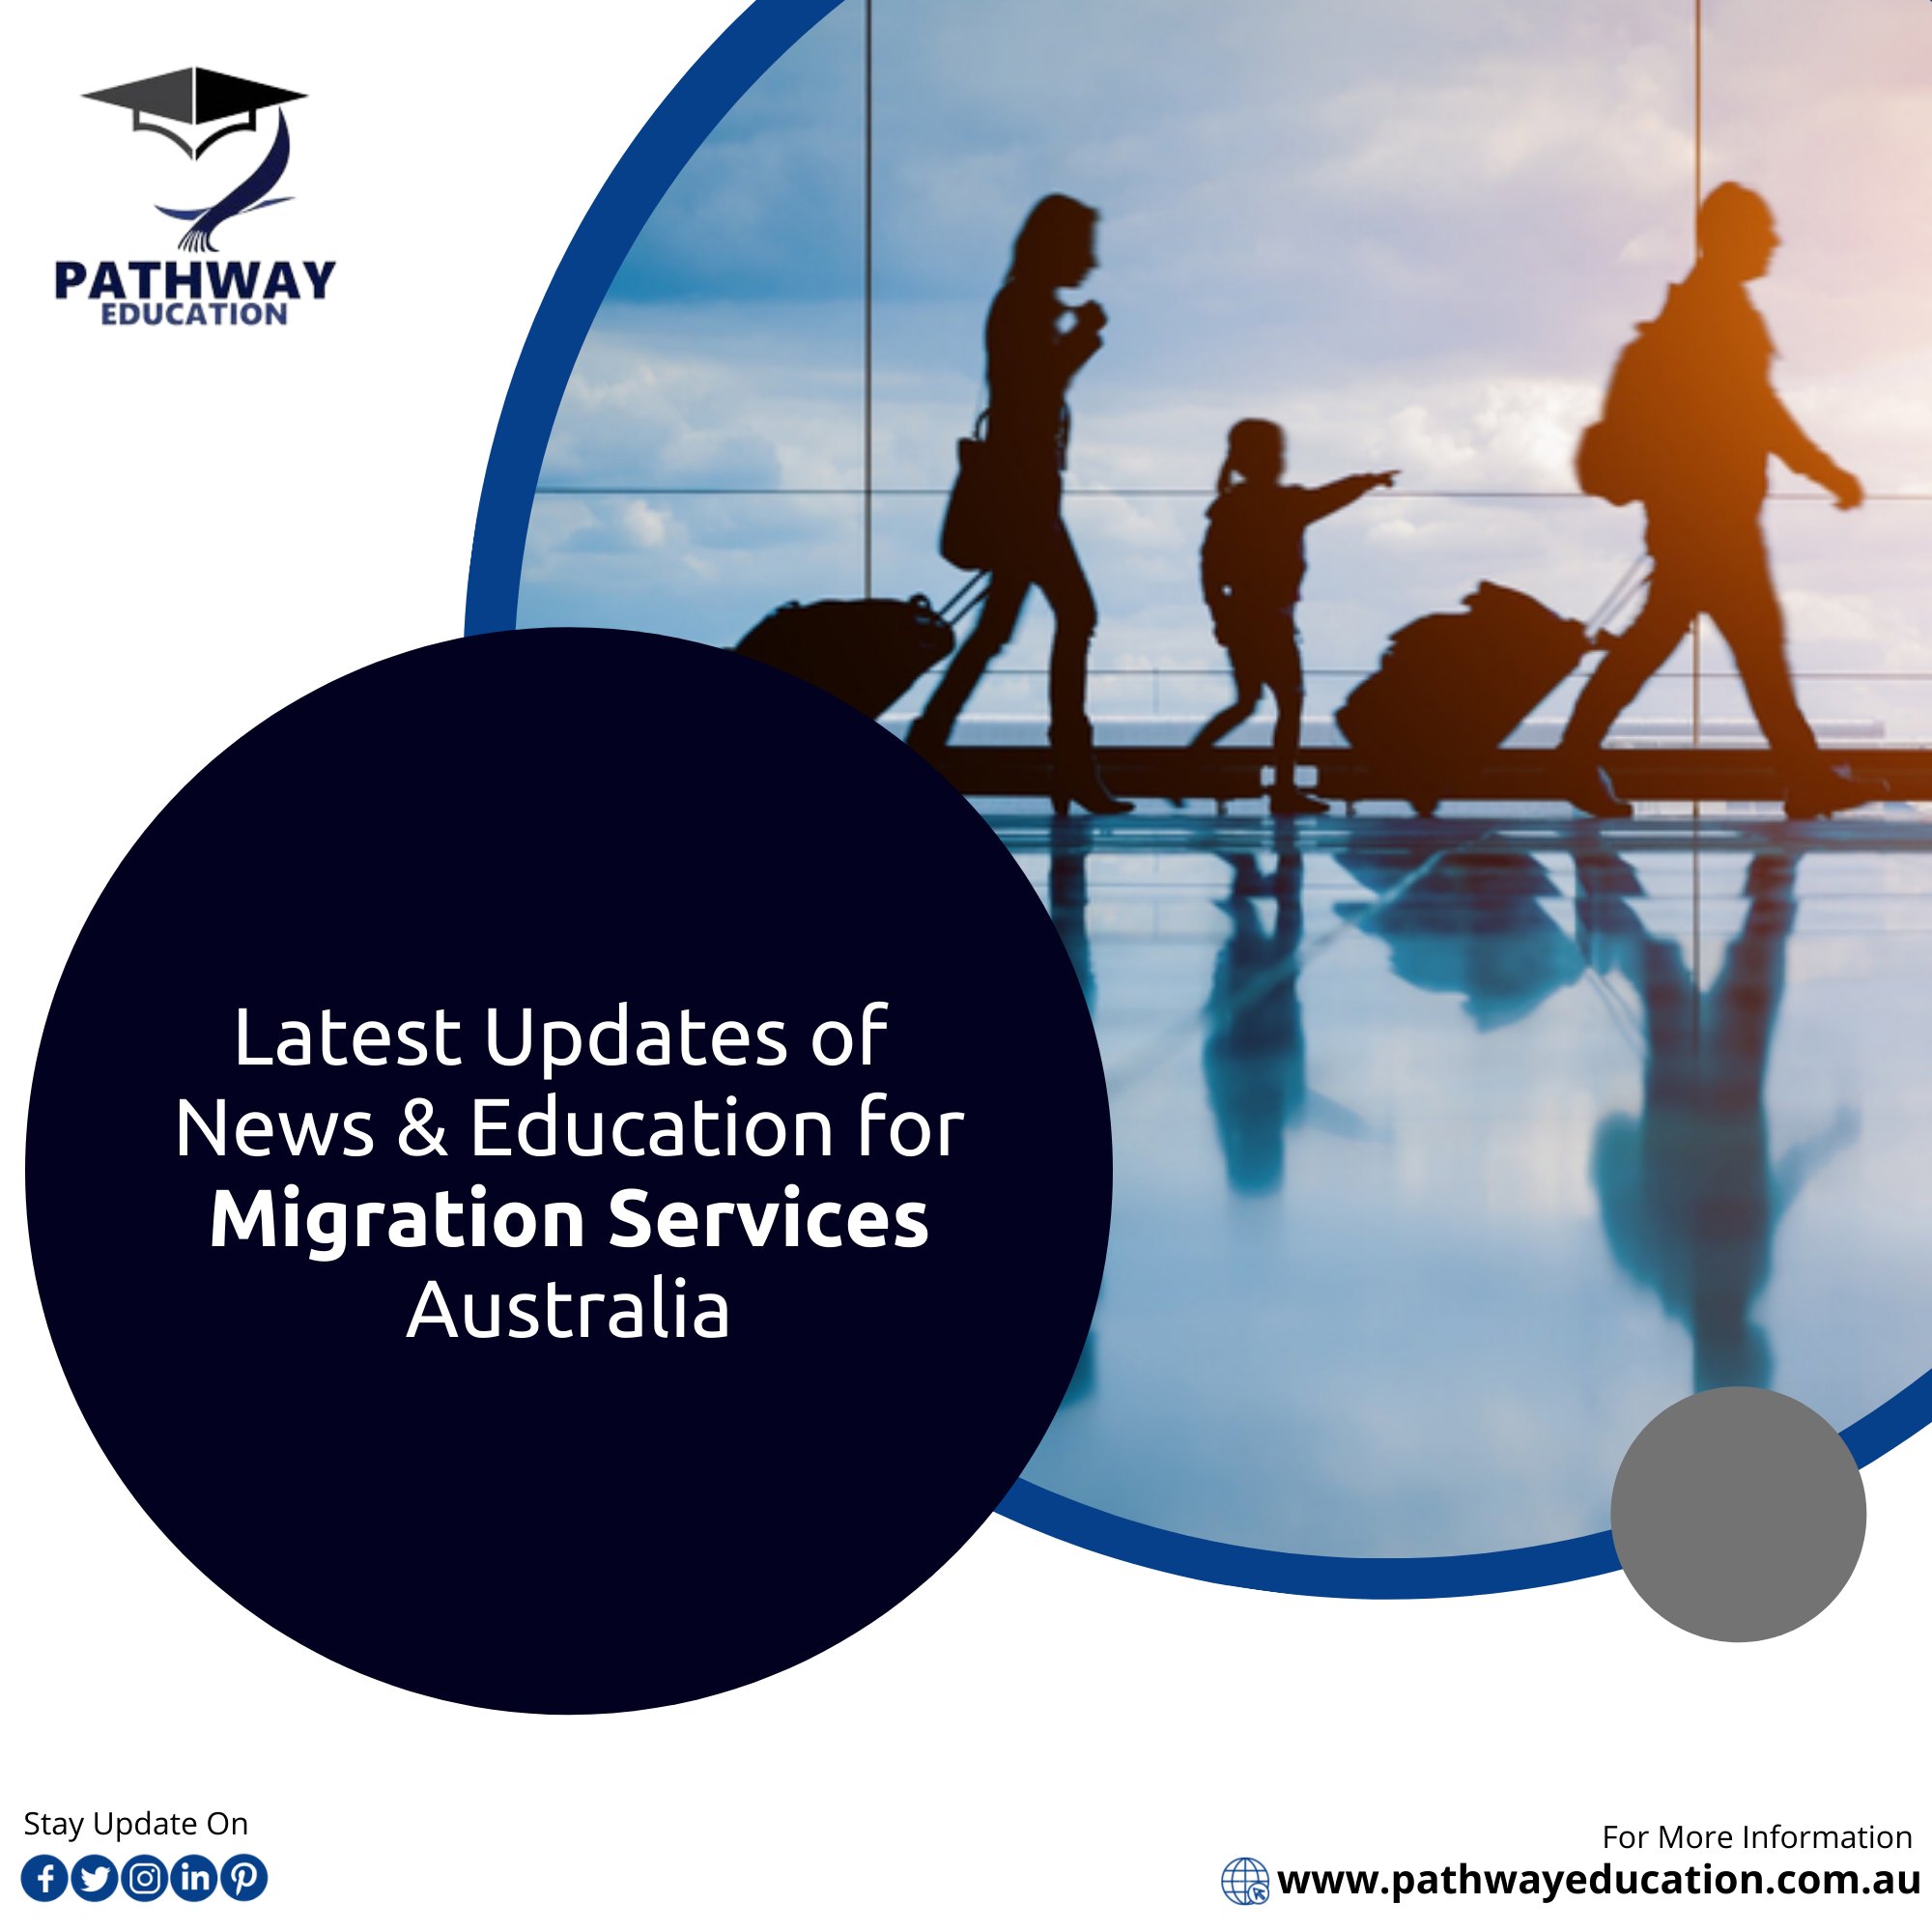 Updates of News & Education for Migration Services Australia